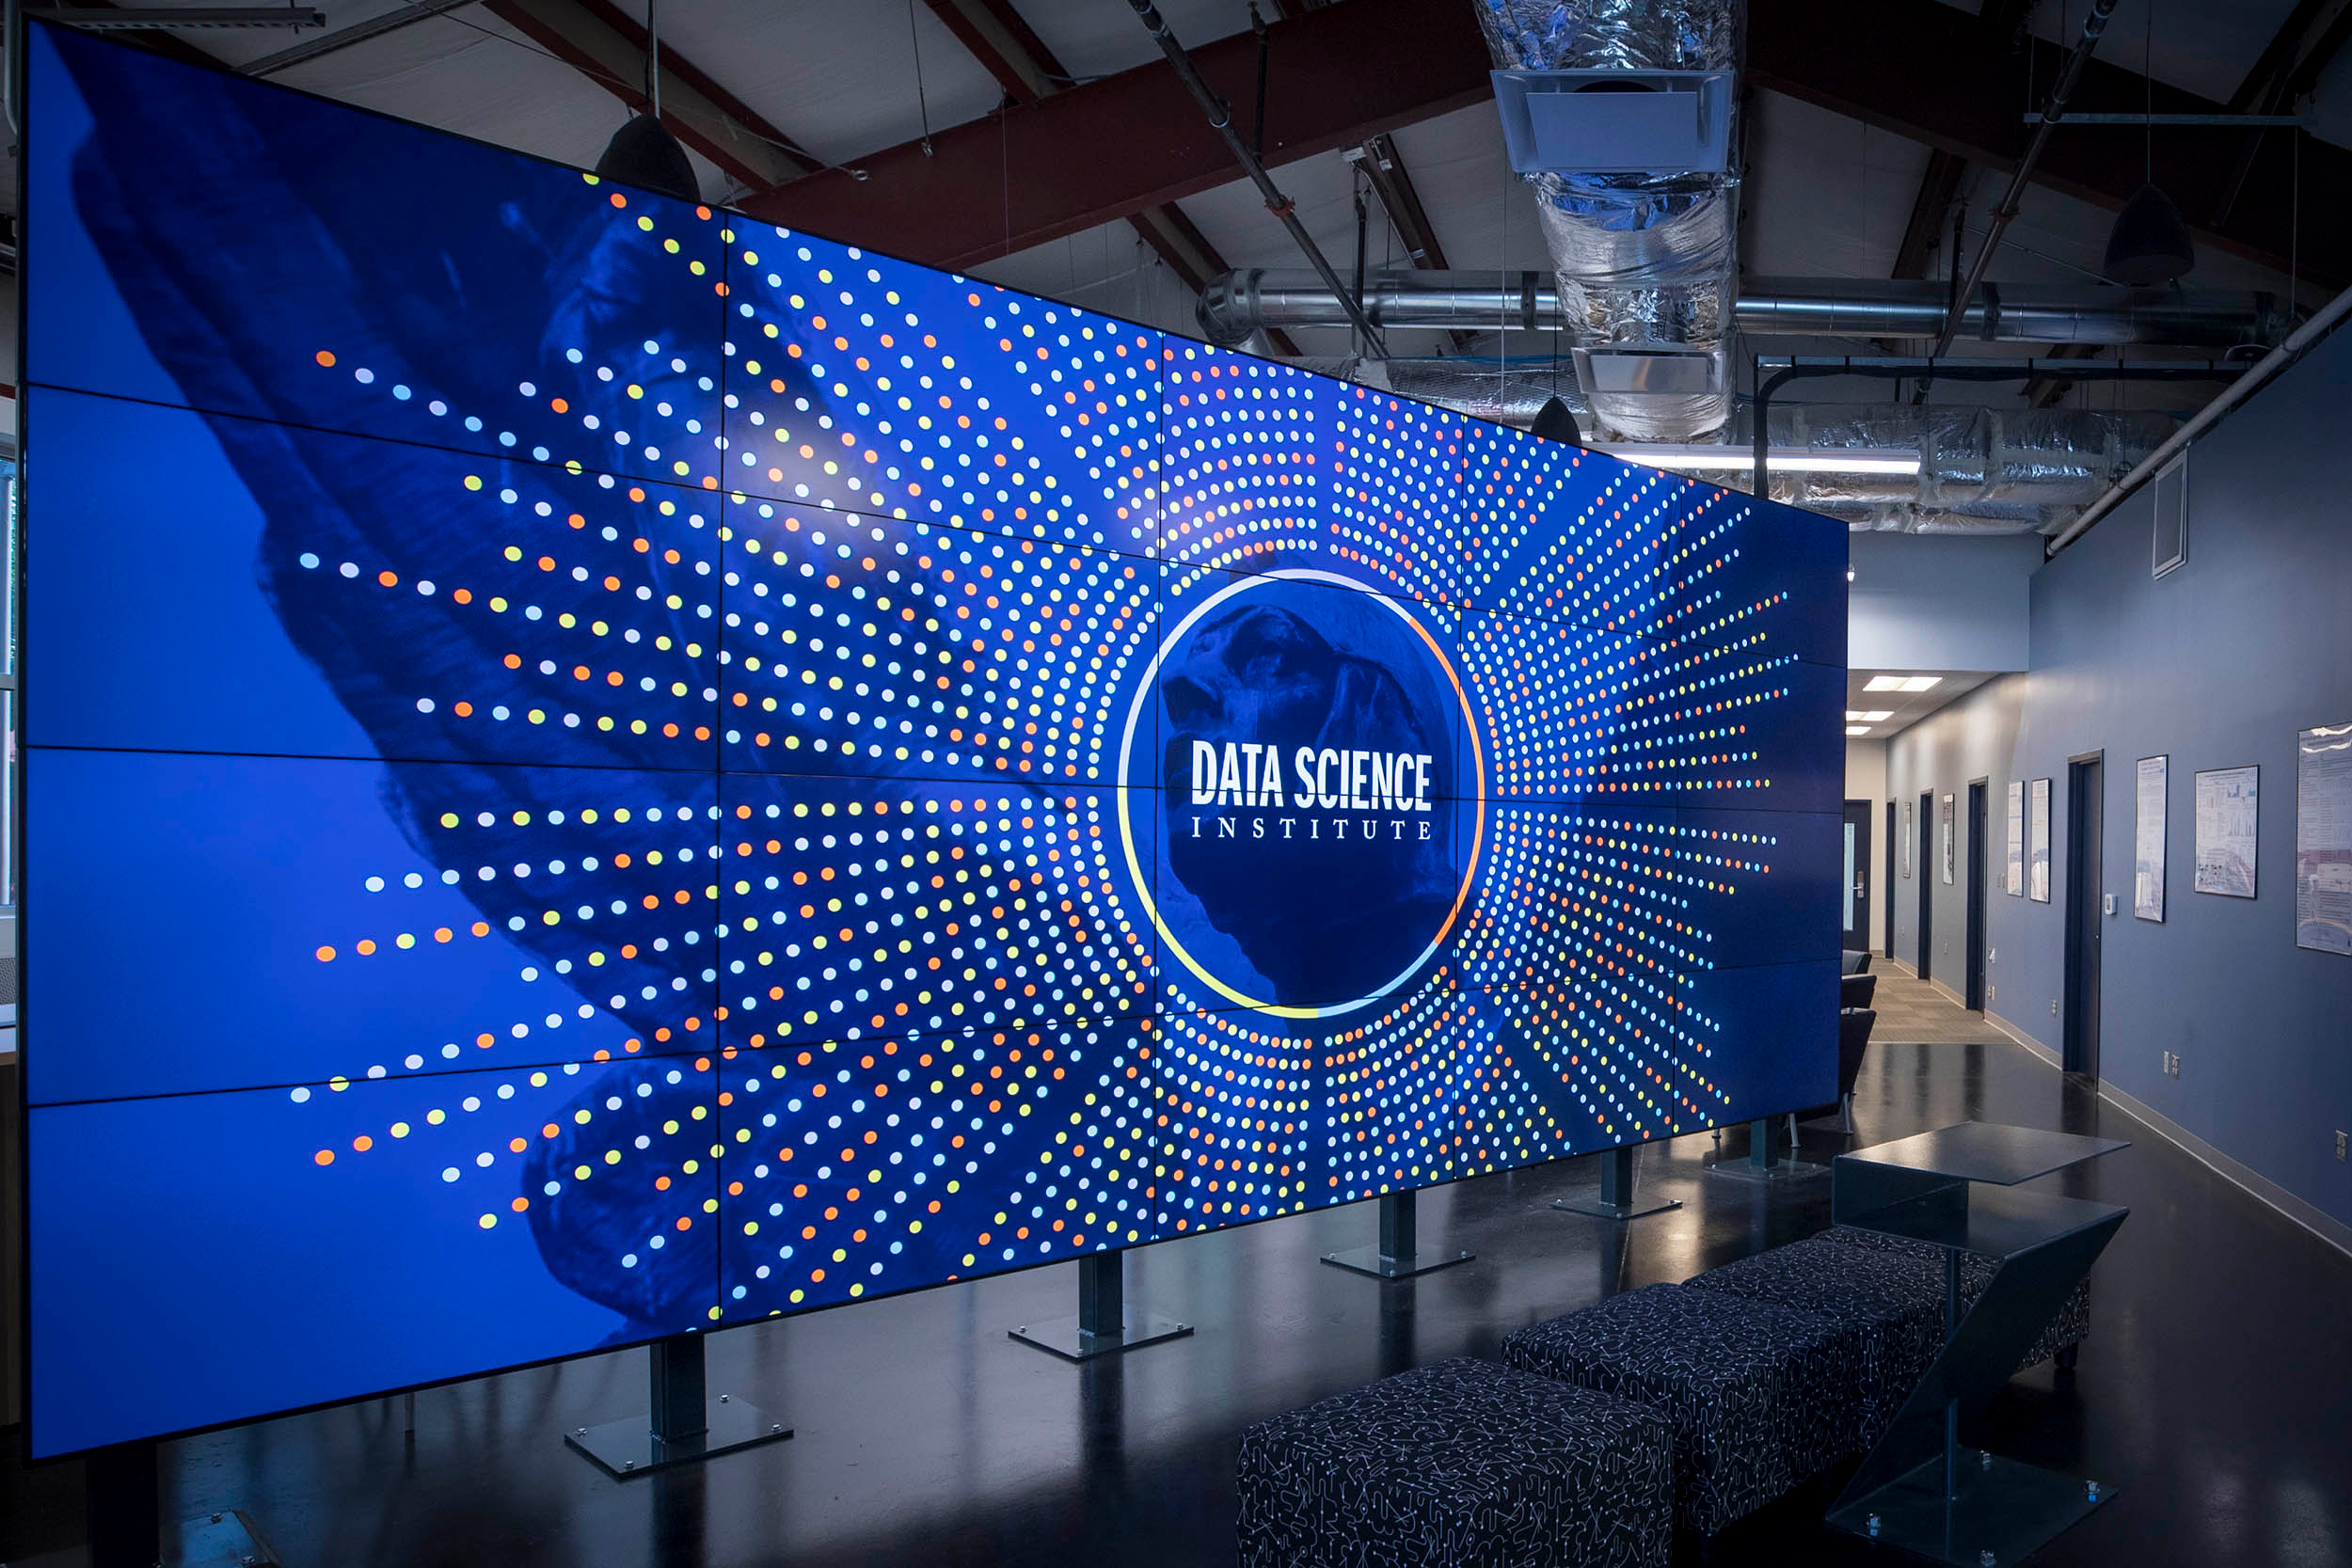 Digital Screens show hundreds of dots with the text Data Science Institute 